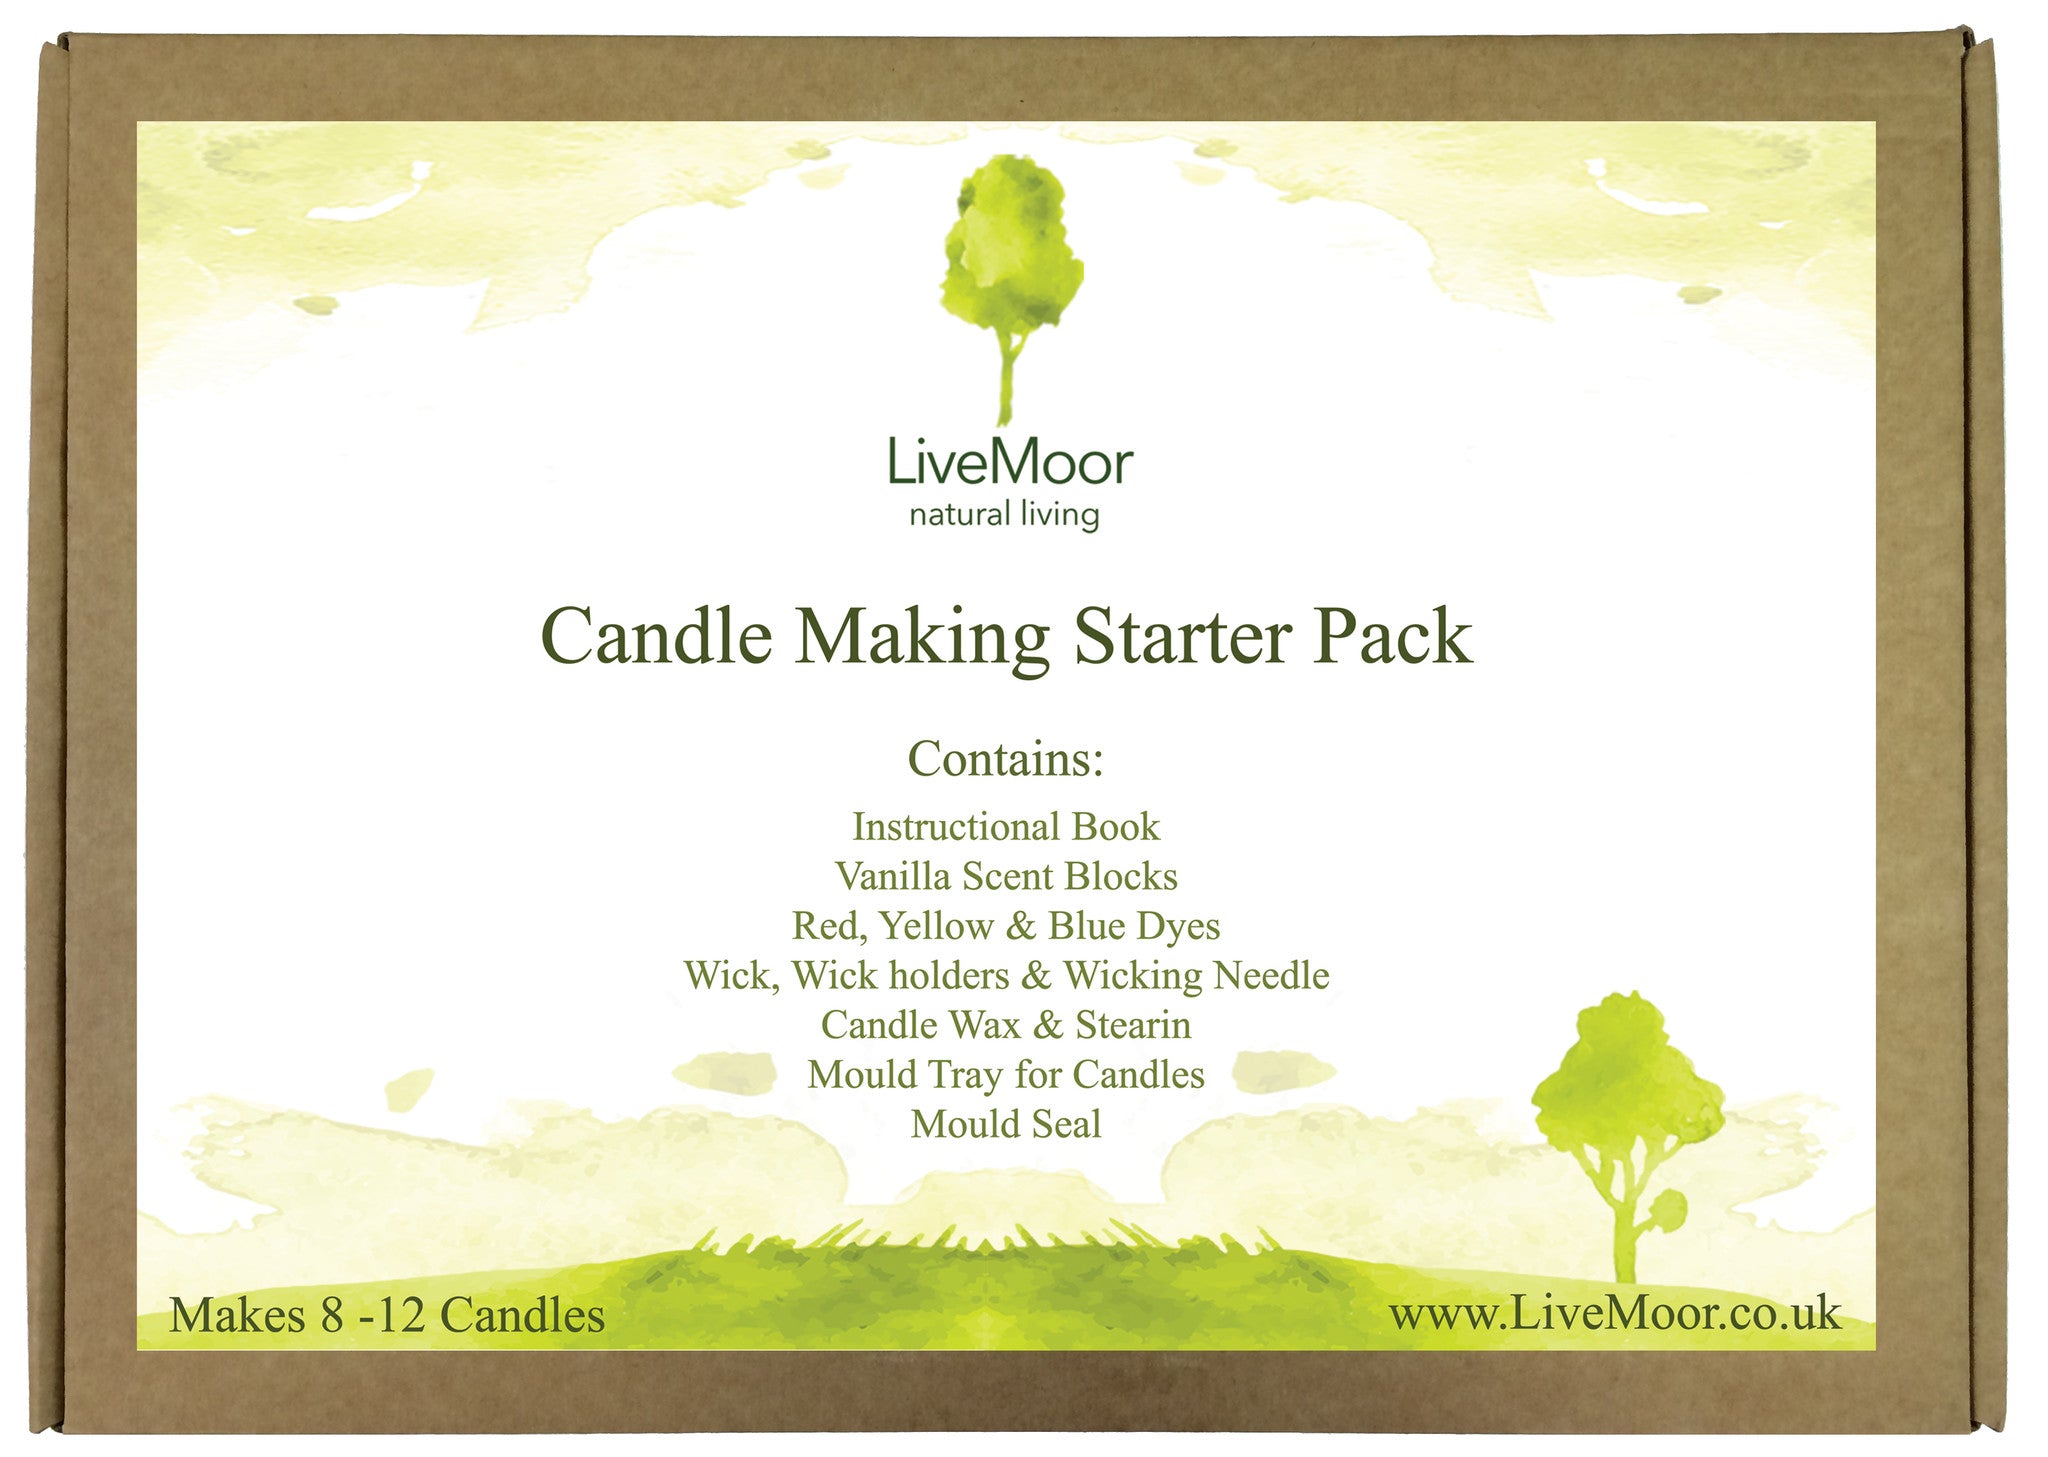 The LiveMoor Candle Making Starter Kit